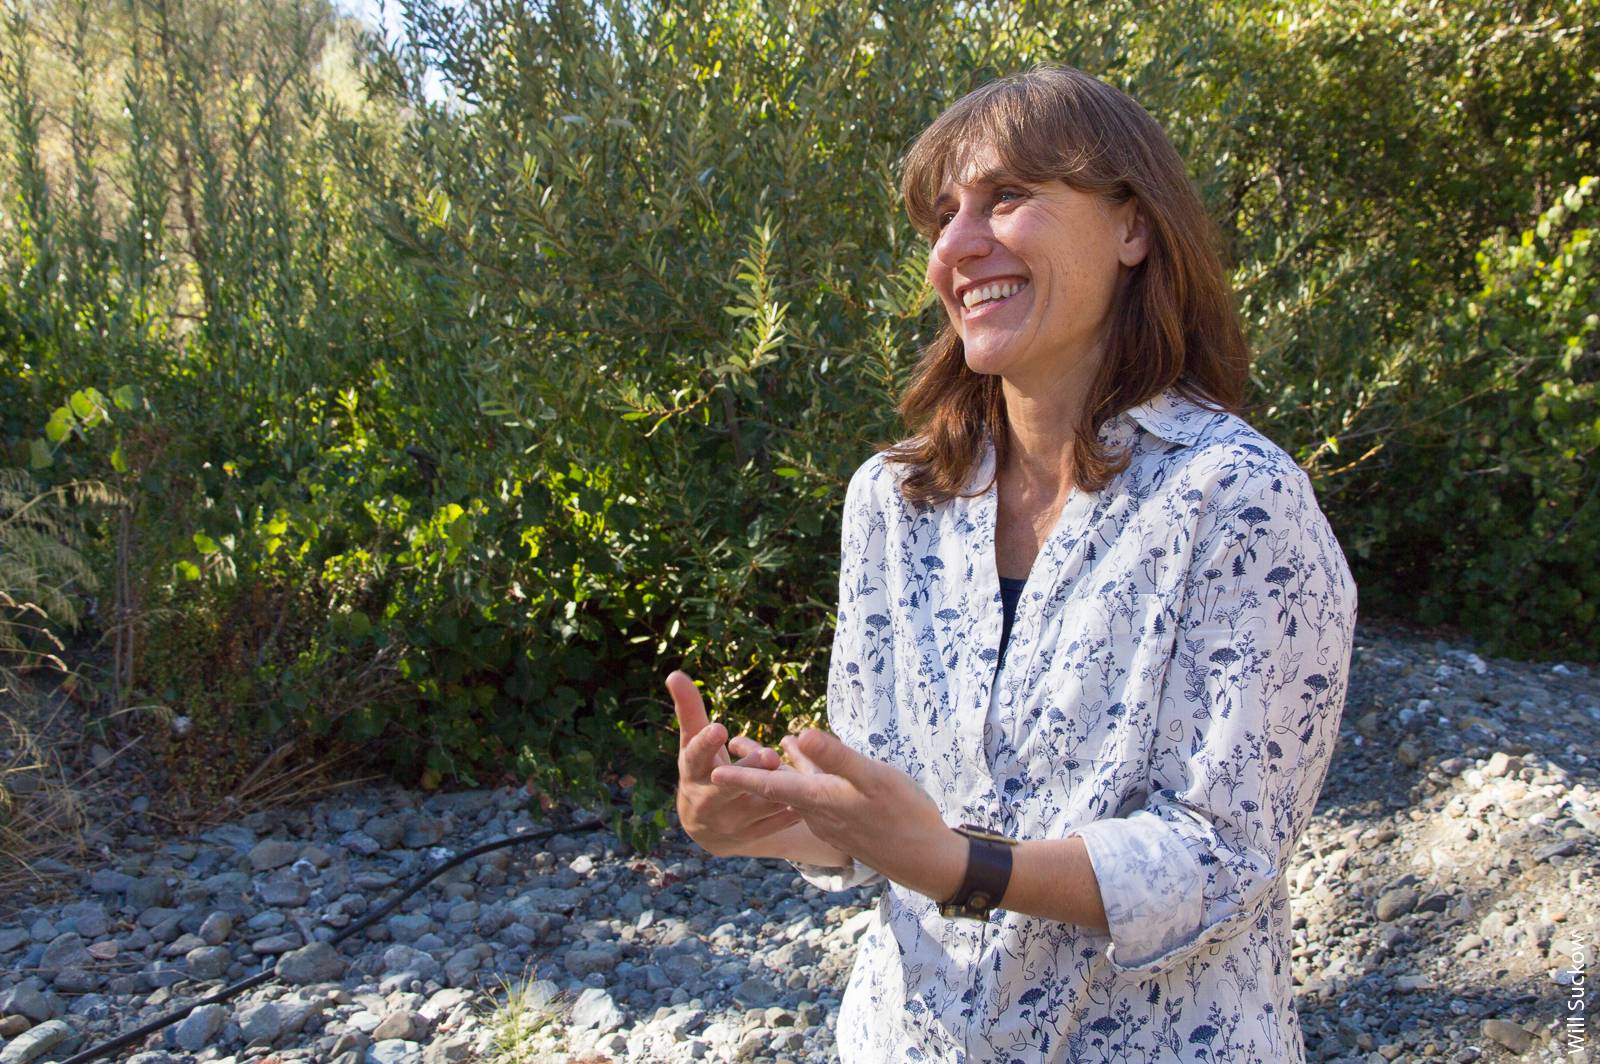 Research by Merenlender and her collaborators has helped to transform the practice of stream restoration in Mediterranean climates.